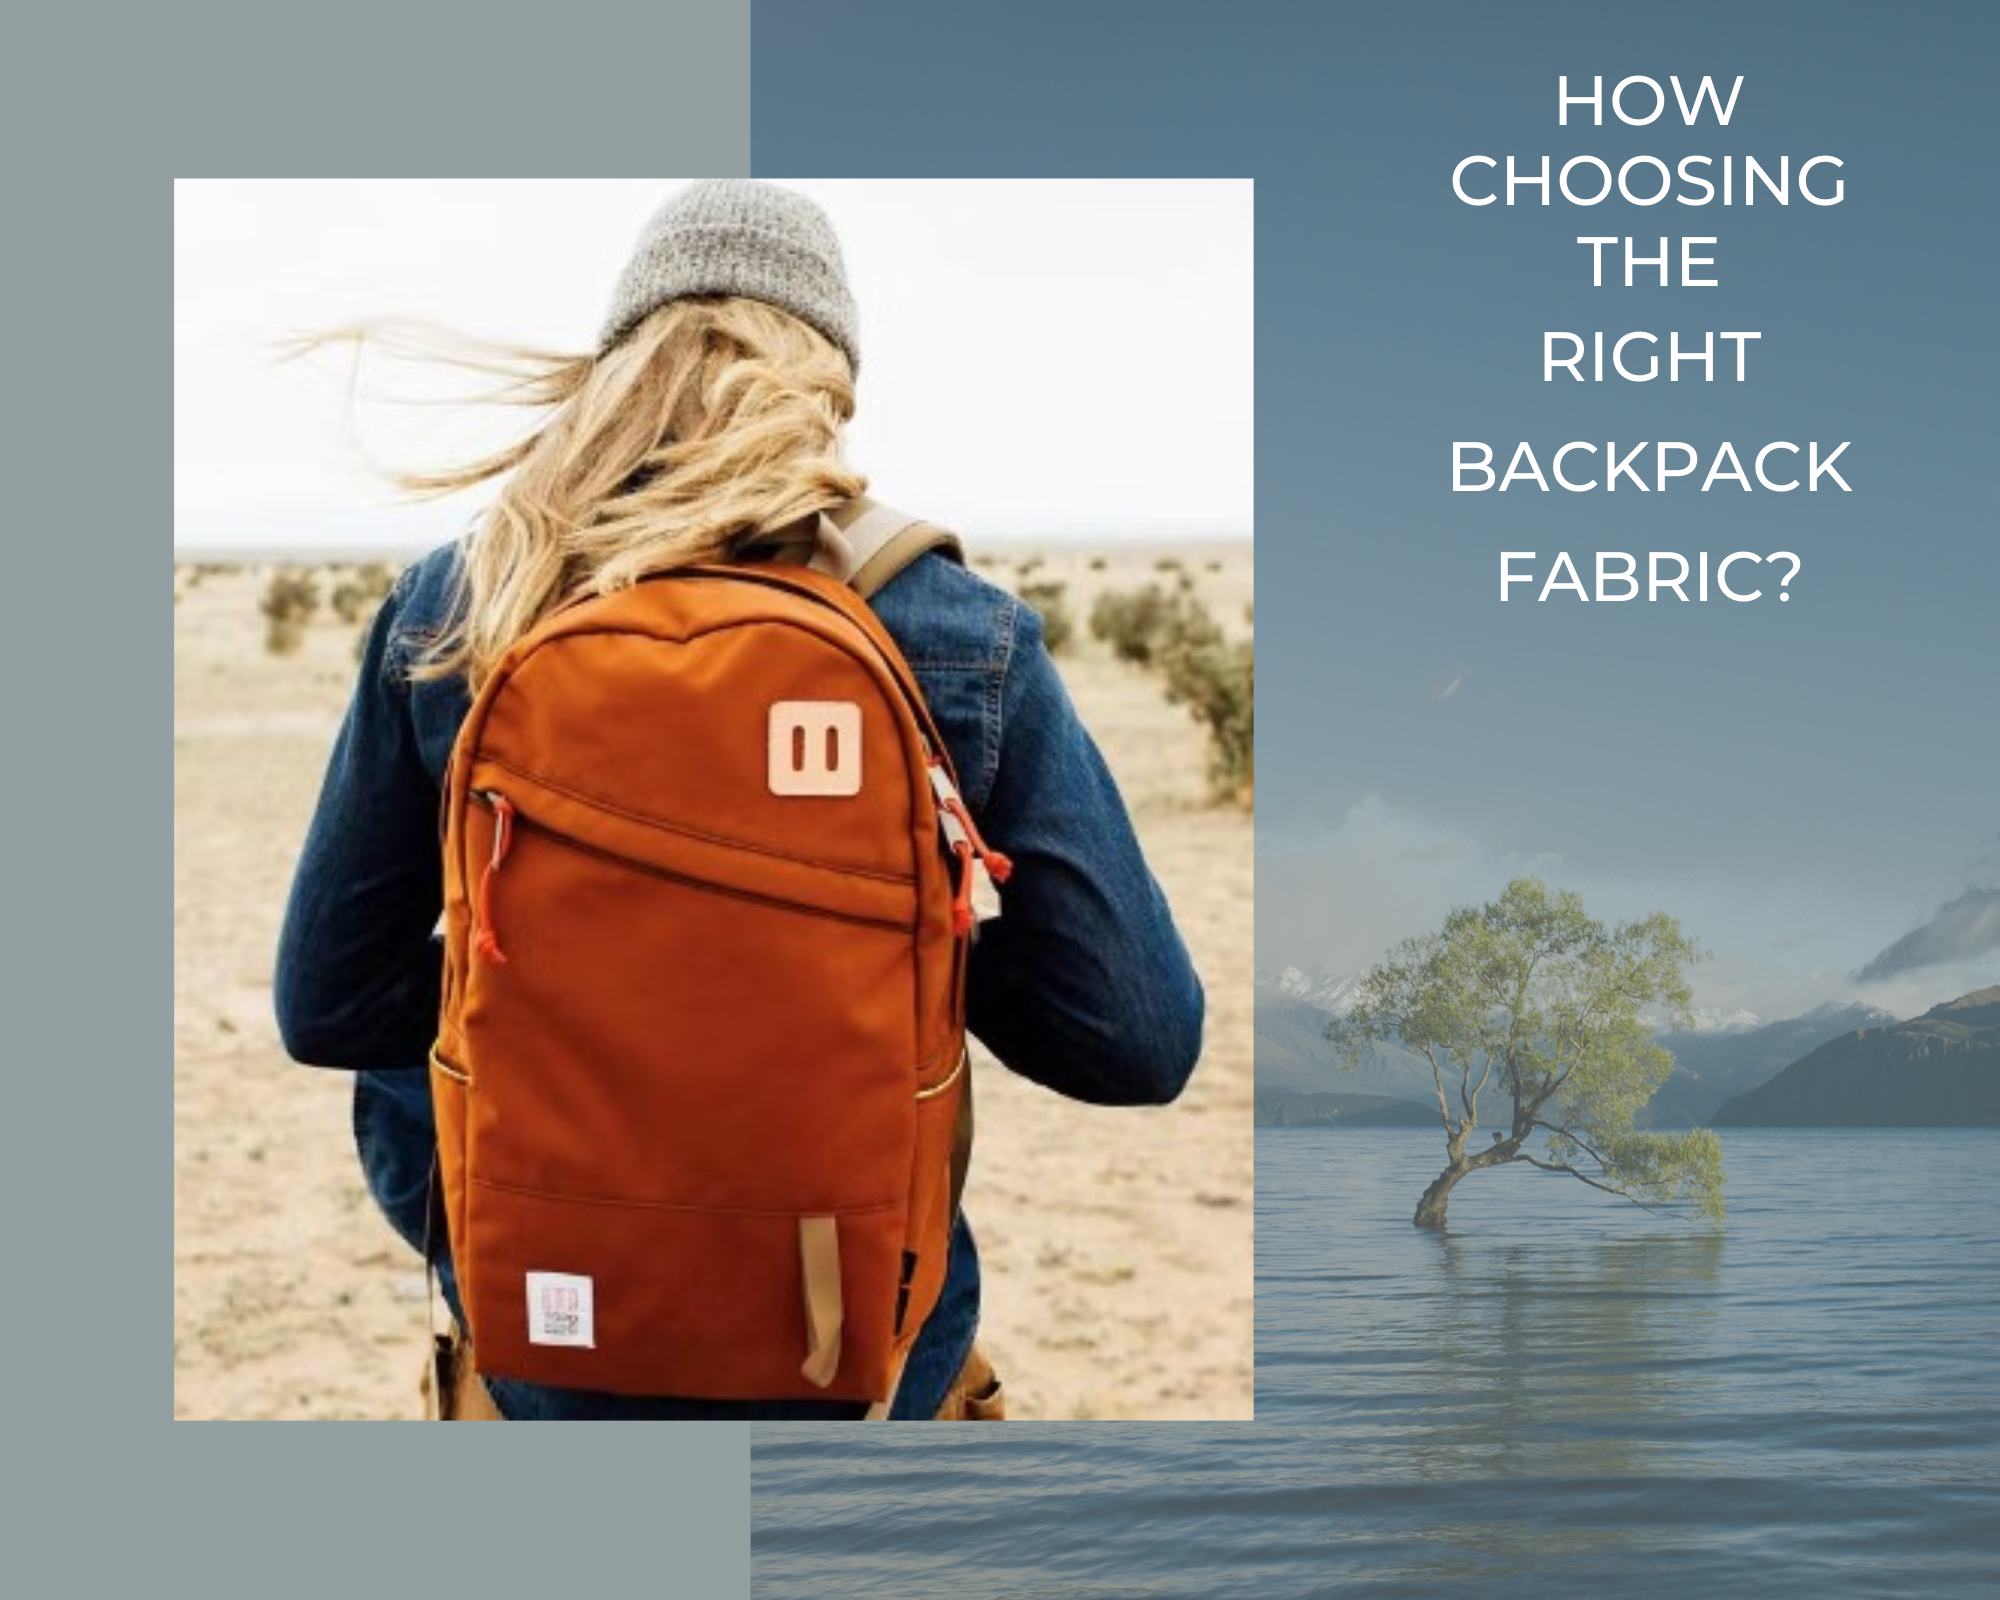 How Choosing The Right Backpack Fabric